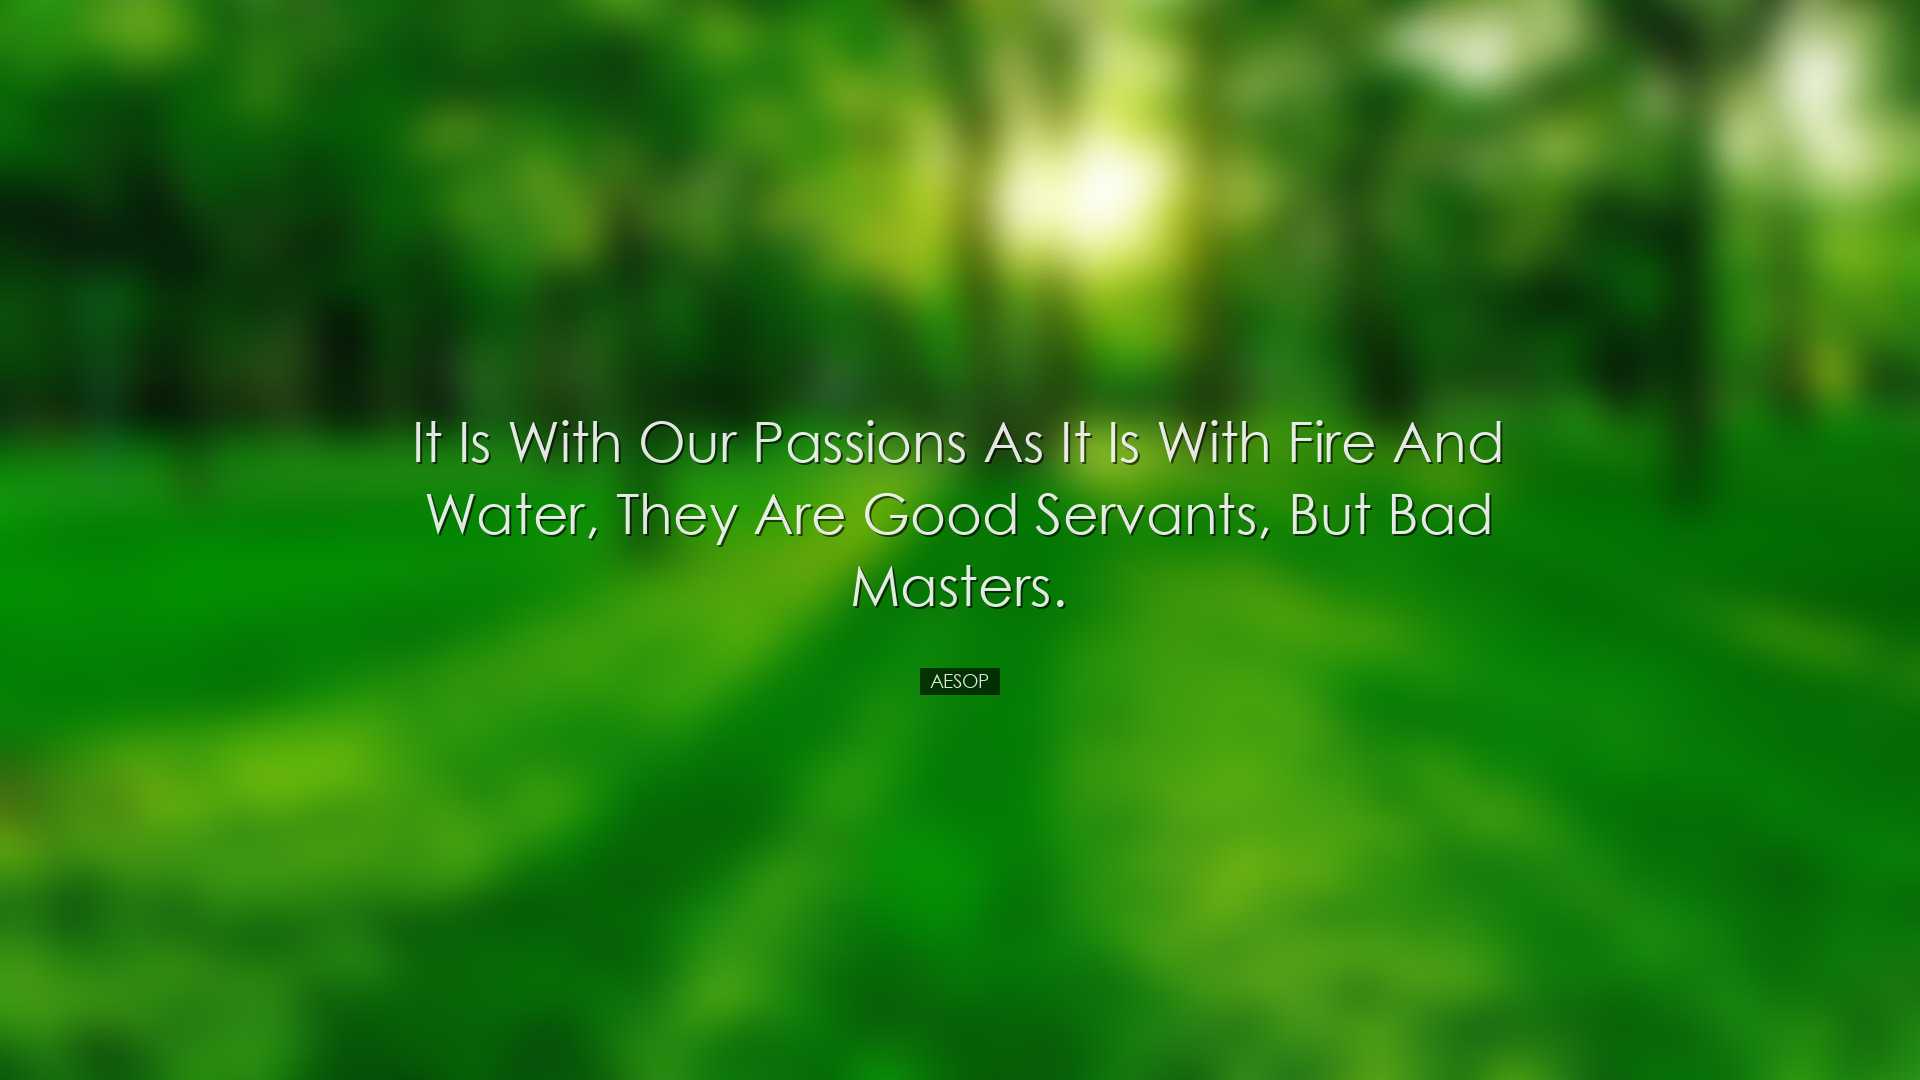 It is with our passions as it is with fire and water, they are goo